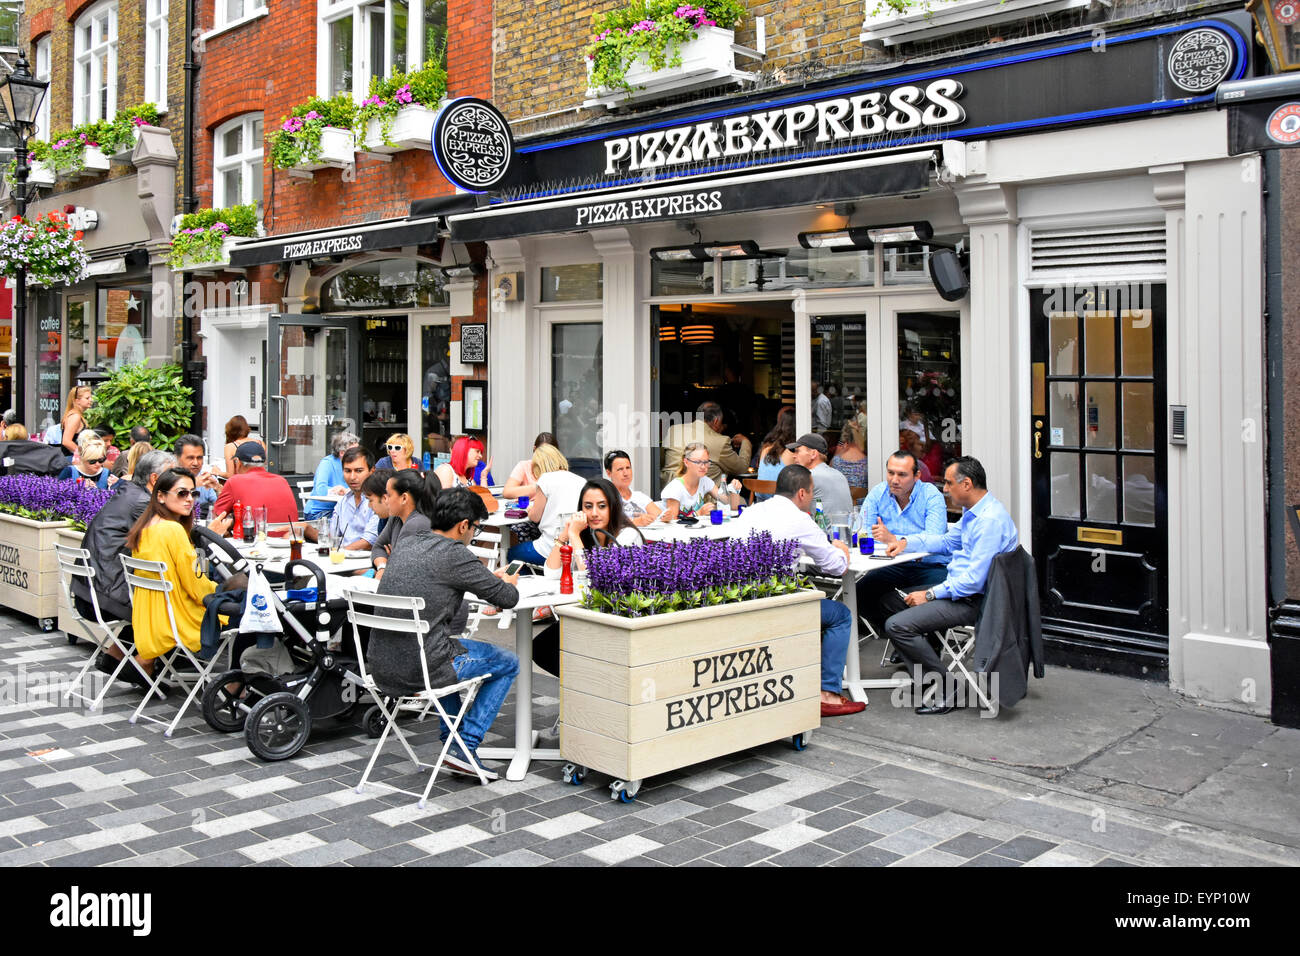 Pizza Express restaurant with people eating out dining outdoors in St Christophers Place off Oxford Street summer alfresco dining London West End UK Stock Photo